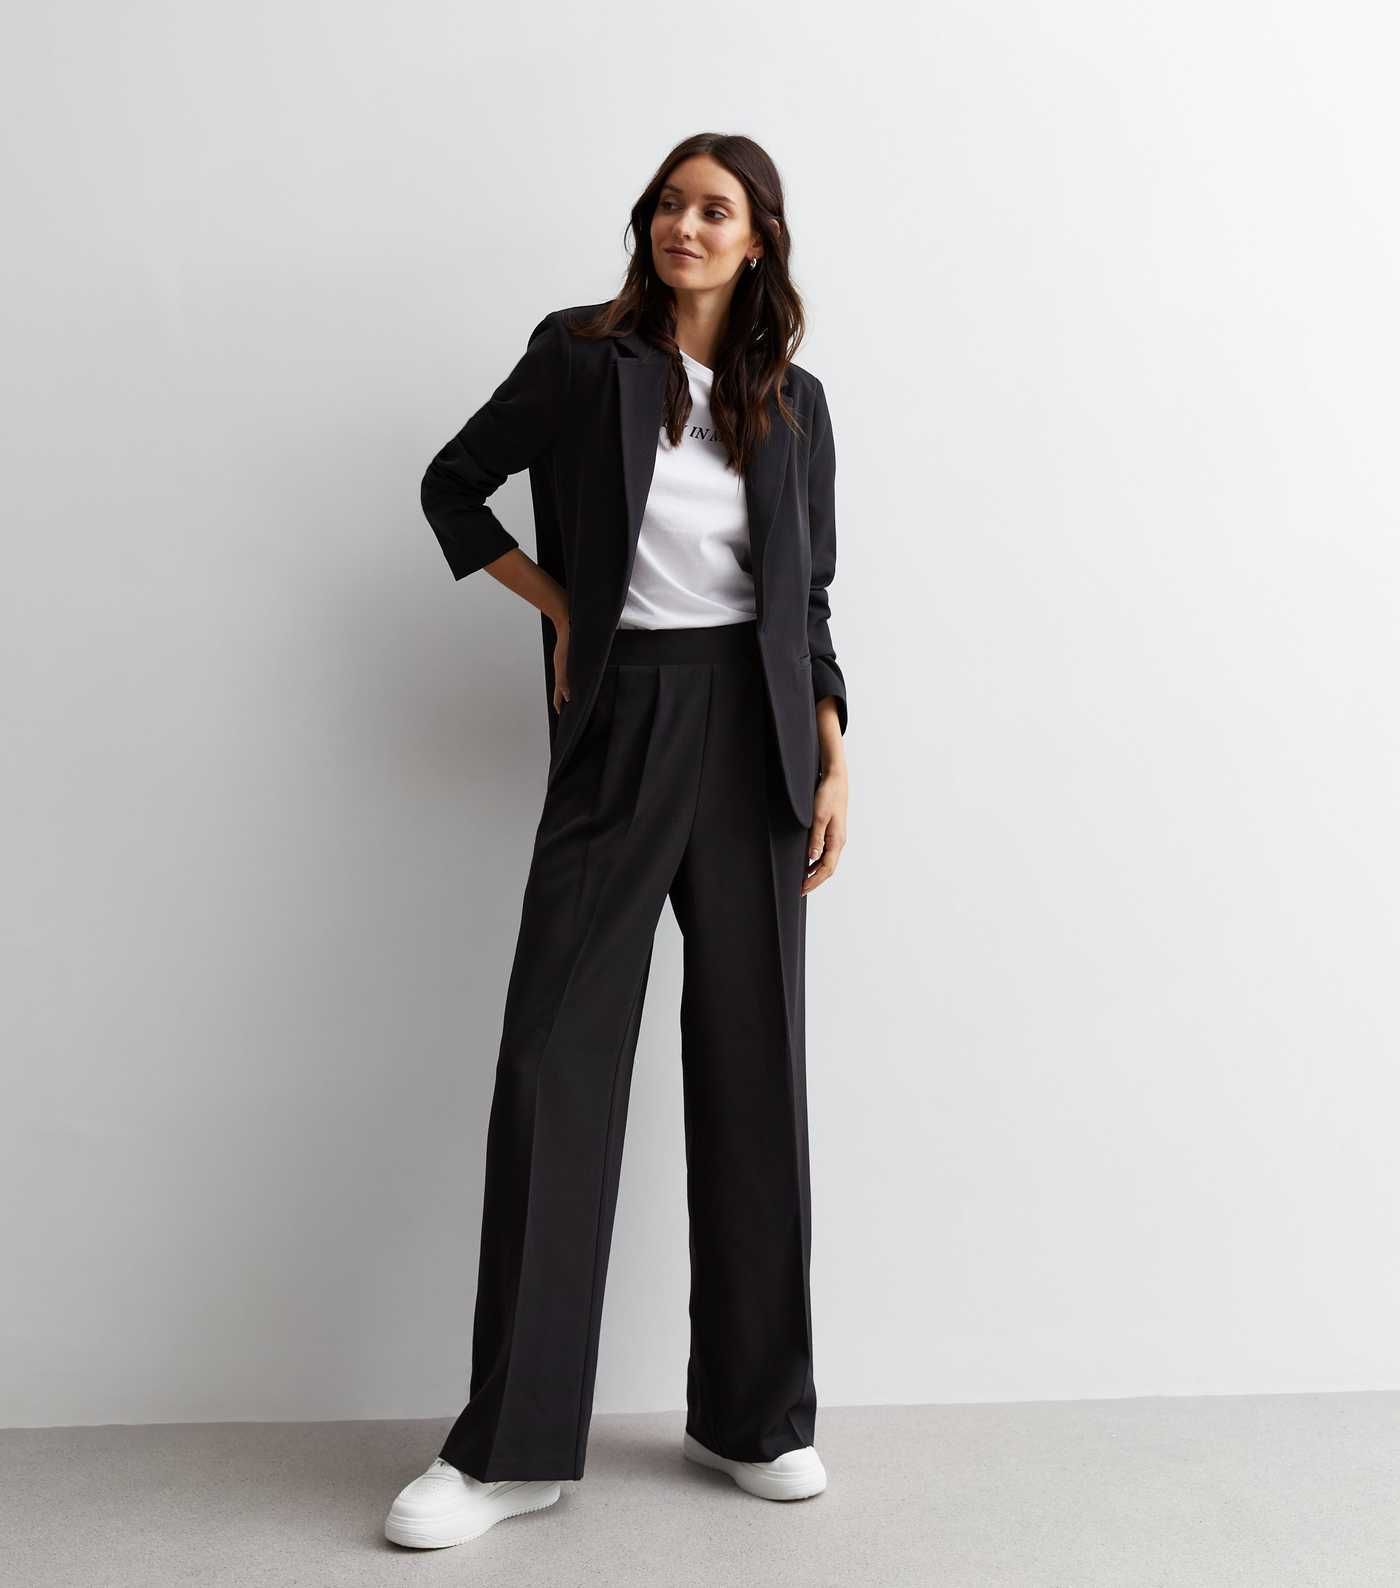 Black High Waist Wide Leg Trousers
						
						Add to Saved Items
						Remove from Saved Items | New Look (UK)